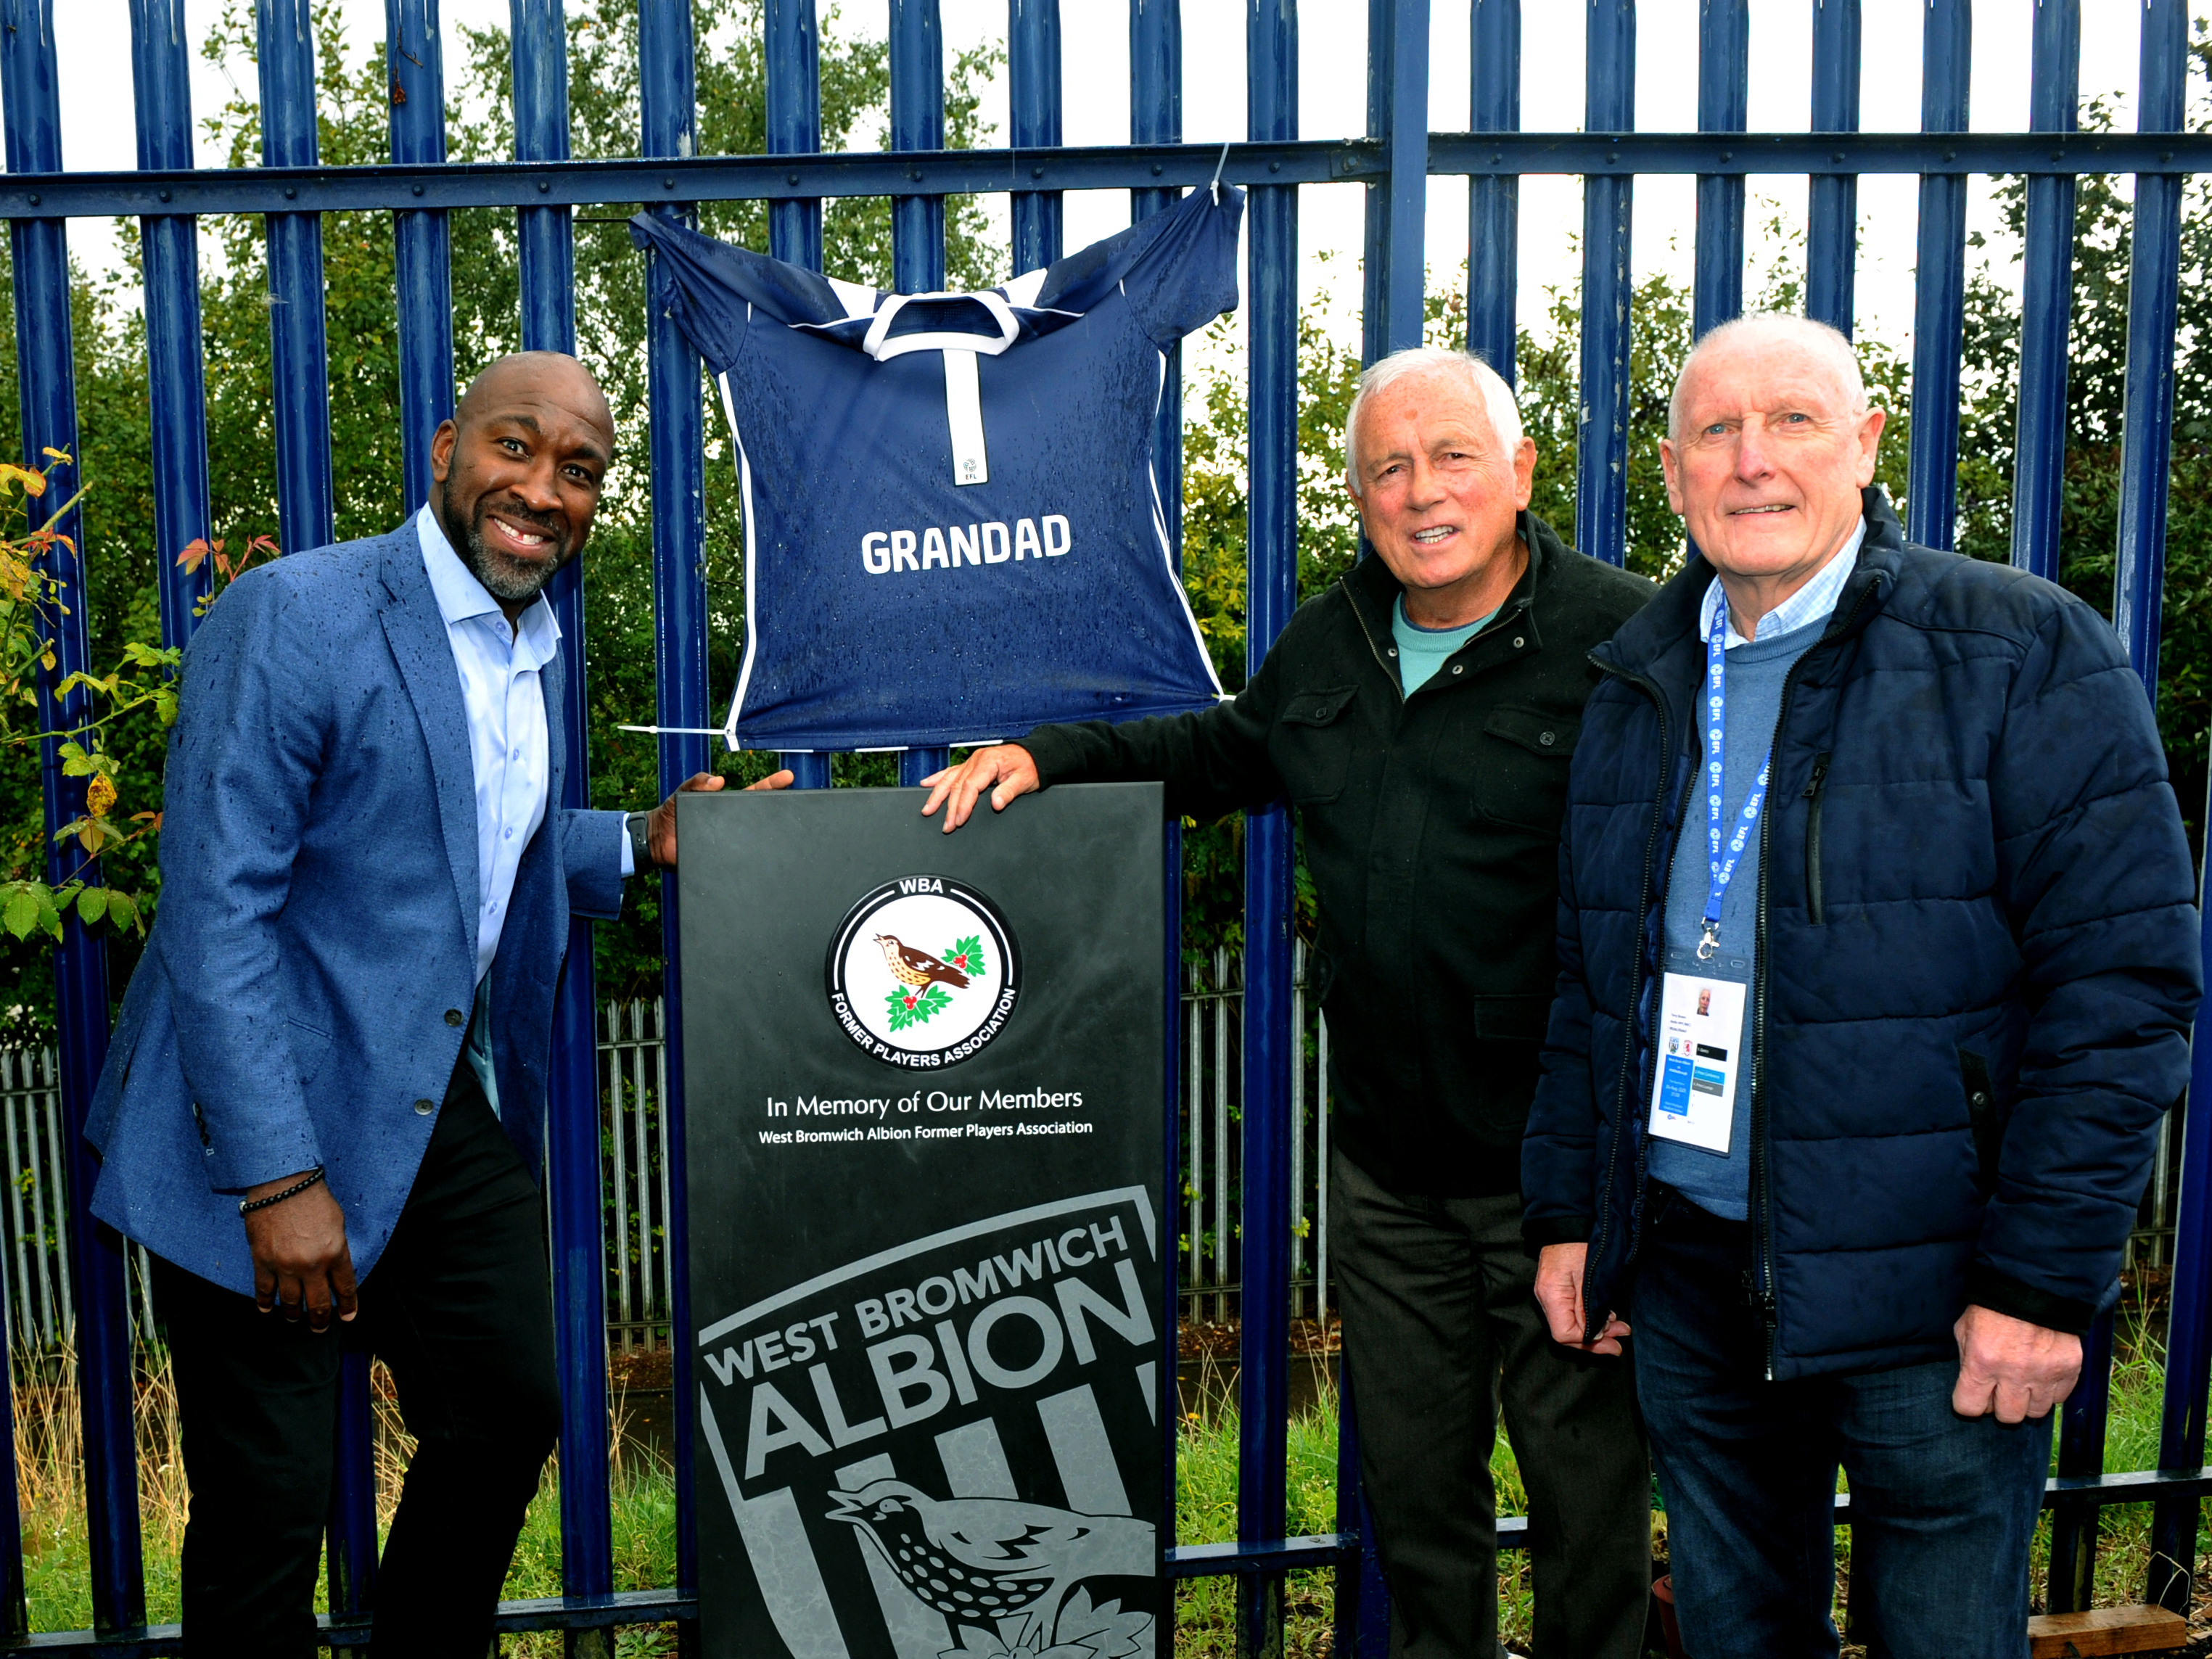 Darren Moore, Ray Wilson and Tony Brown standing next to the memorial slate at The Hawthorns